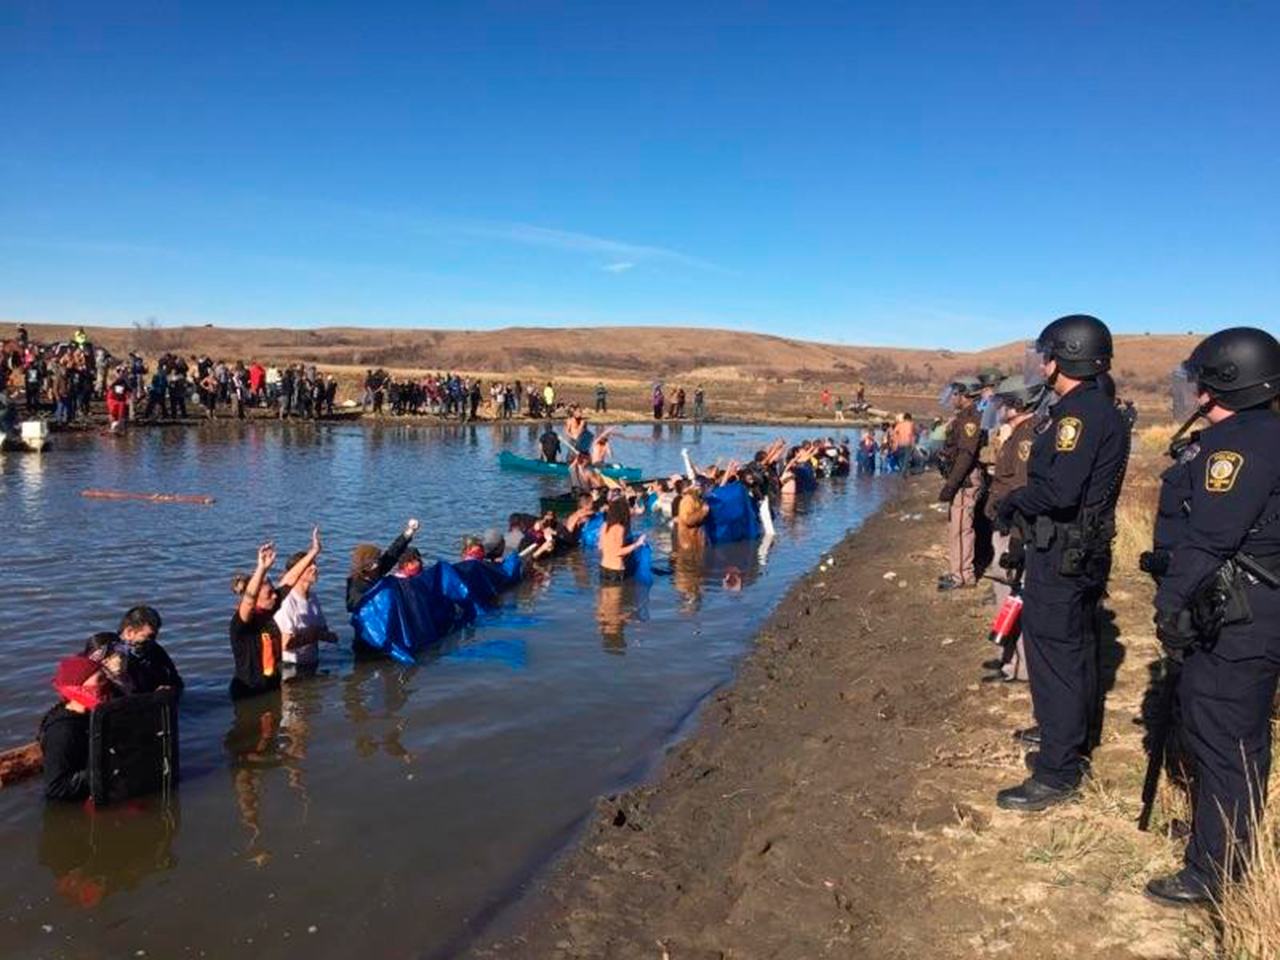 Police from six states have been marshalled by the state of North Dakota to attempt to shut down protests against the Dakota Access Pipeline by tribal members from across the country and their supporters. The pipeline is planned to cross the Missouri within a half mile of the Standing Rock Sioux reservation. The developer of the $3.8 billion pipeline is Energy Transfer Partners of Dallas (Morton County Sheriff’s Office/TNS)